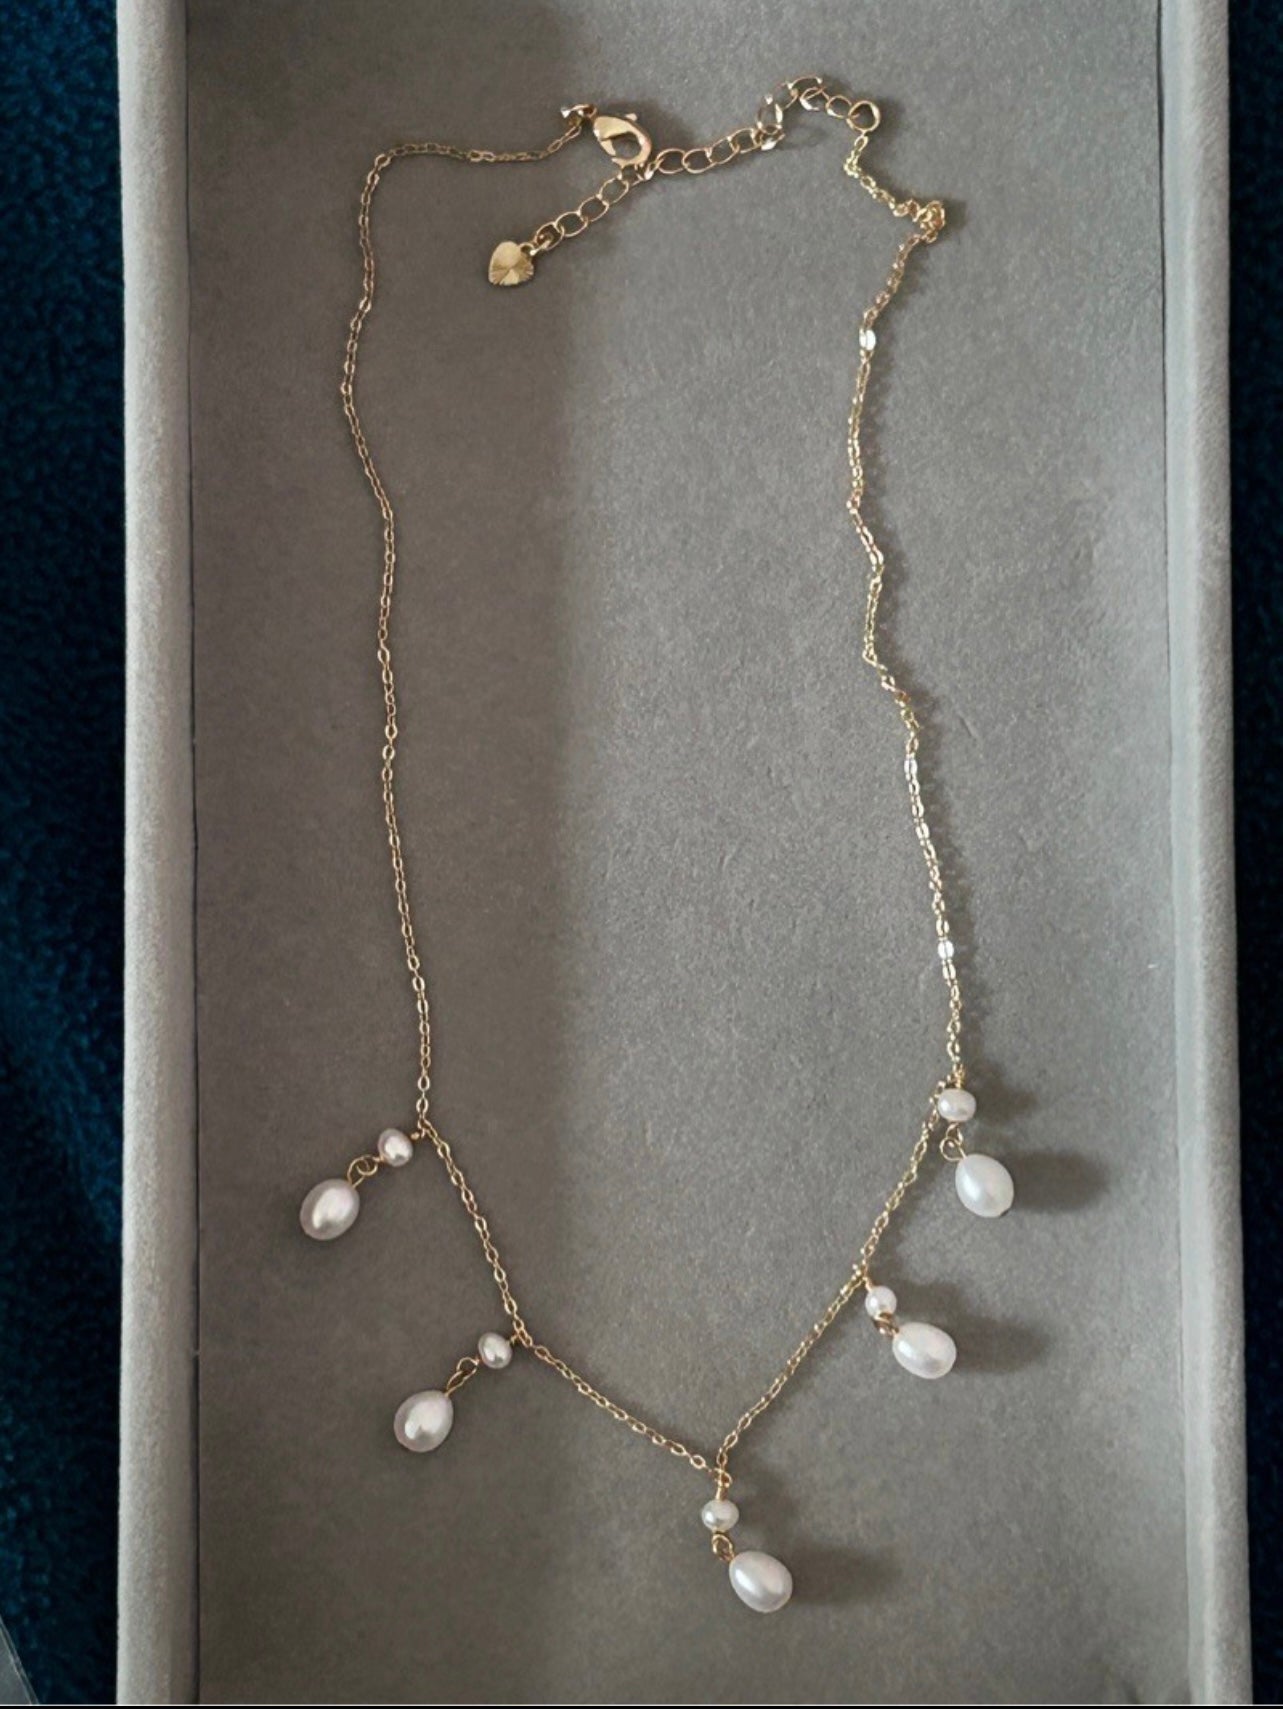 Starry Night Pearl Necklace